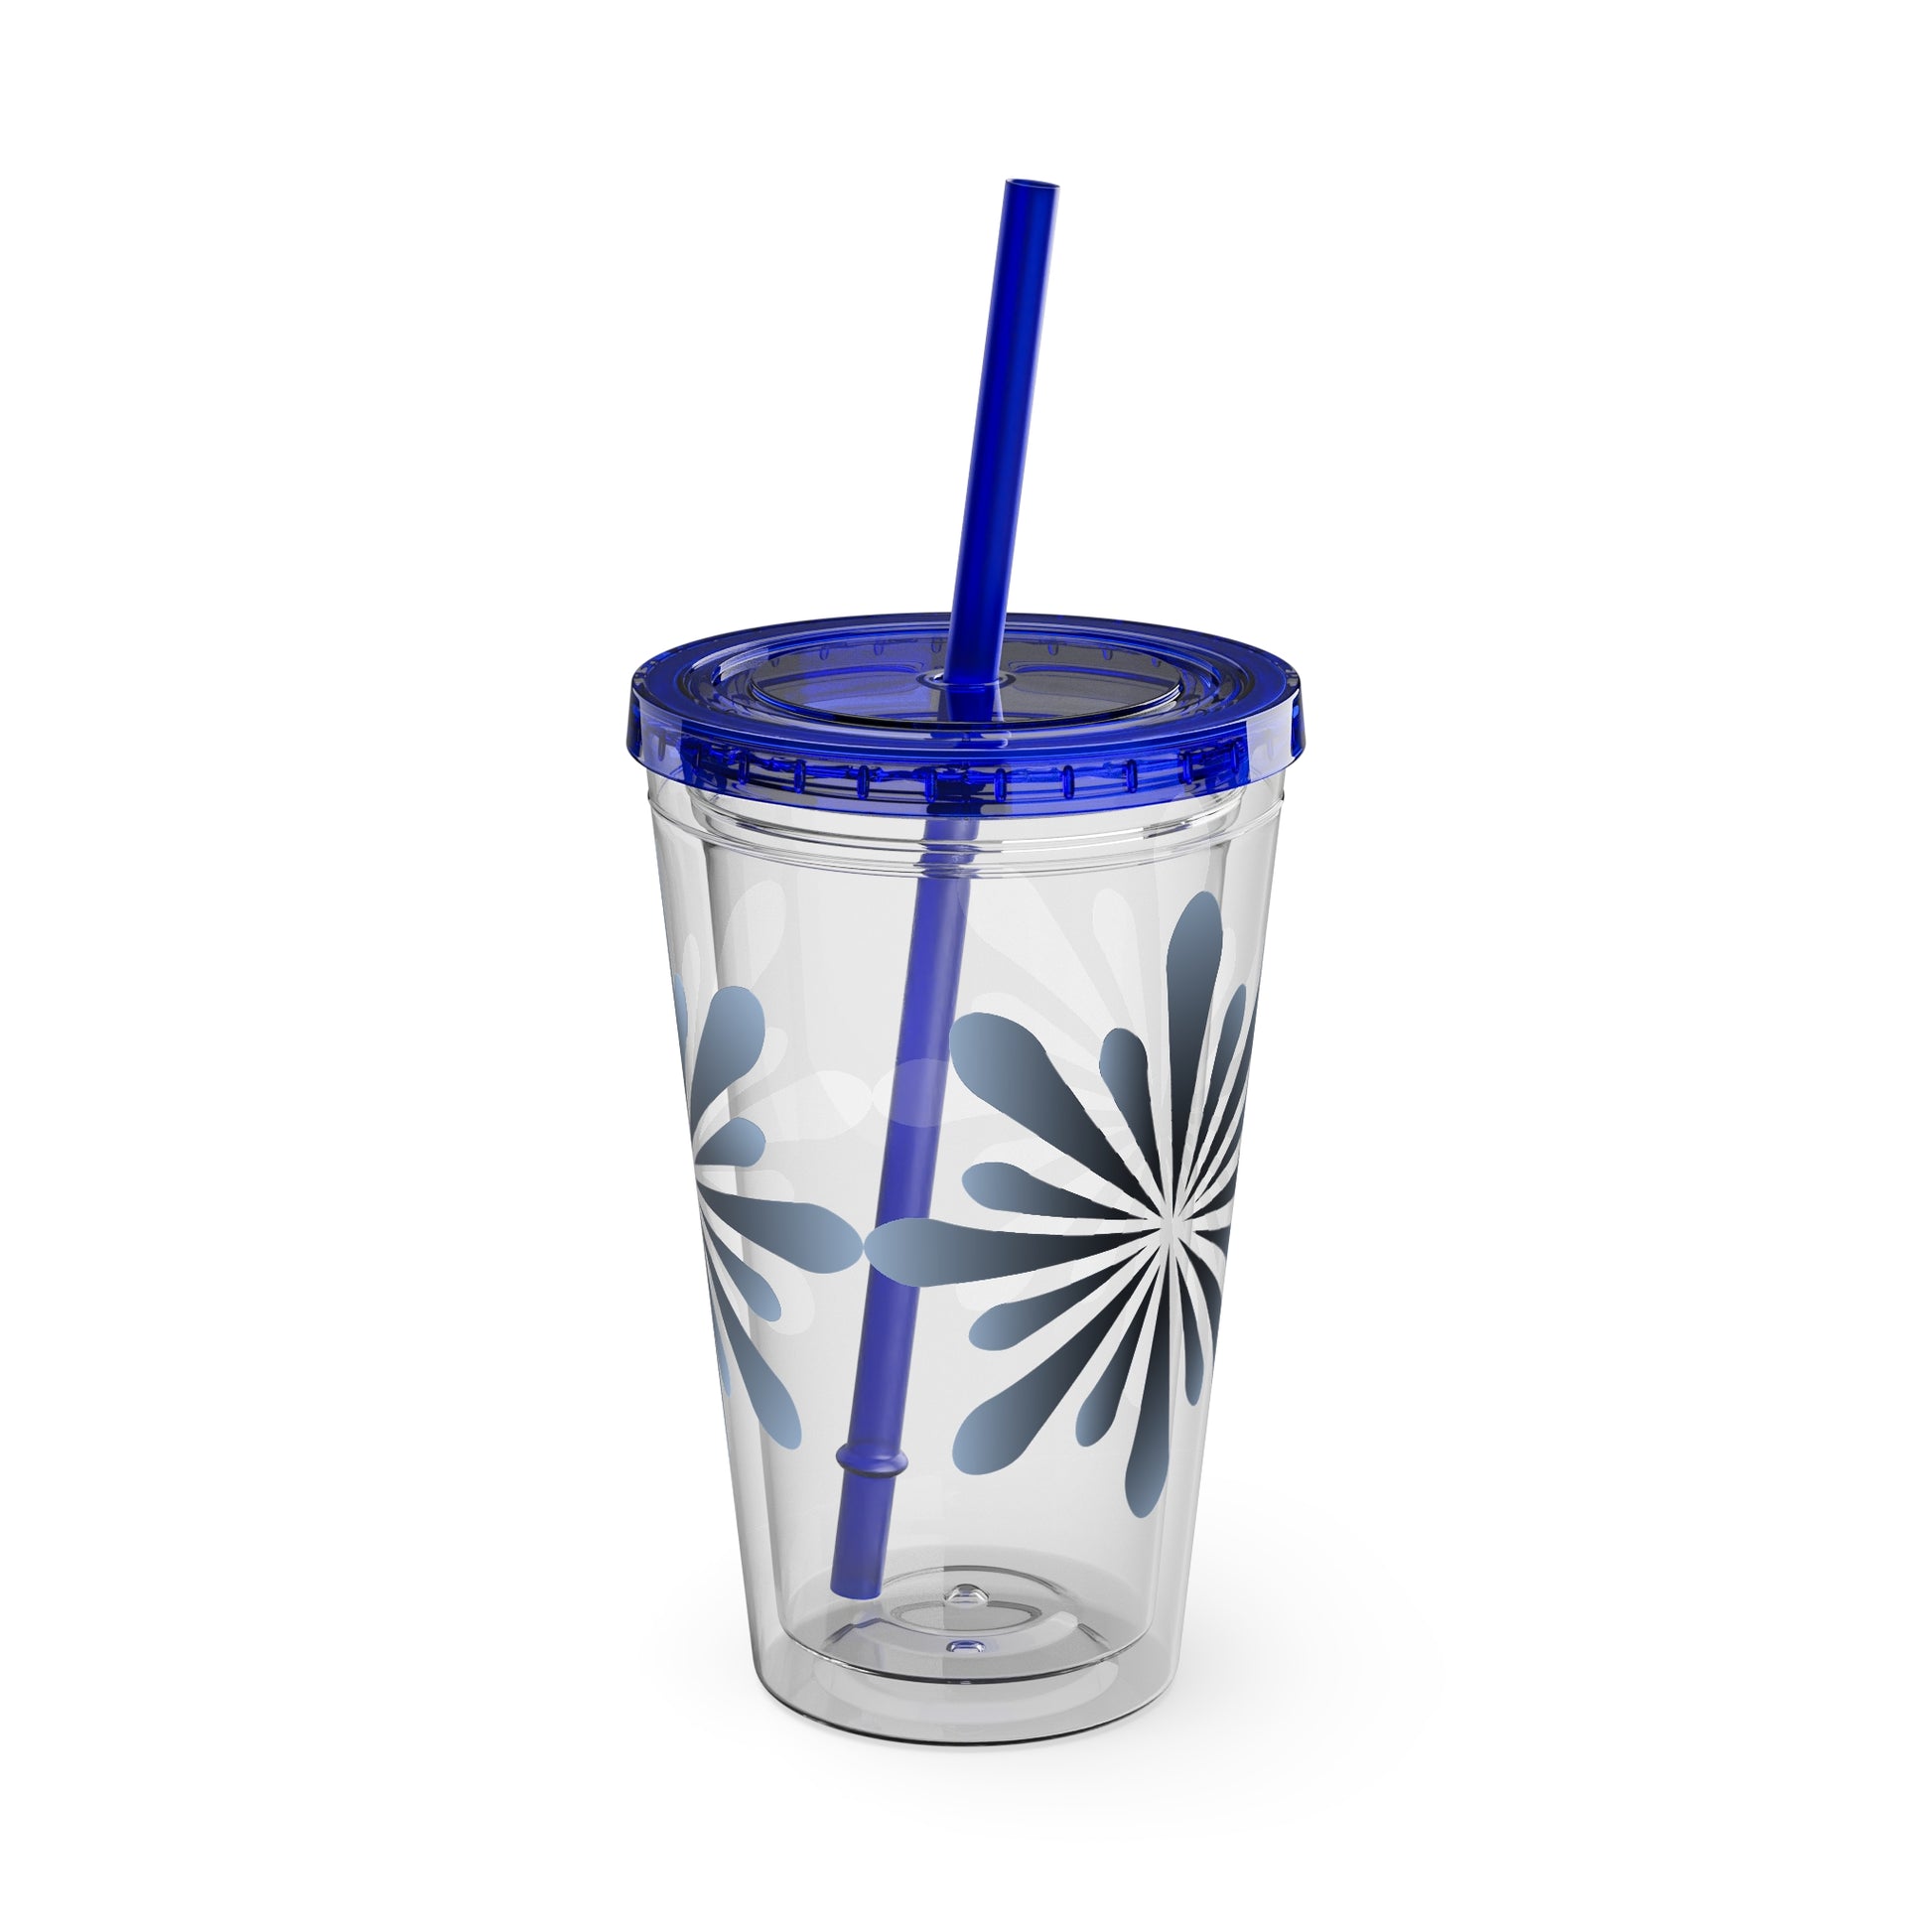 A Blue Star-burst Tumbler with a blue lid and a straw, designed to be crack-resistant.